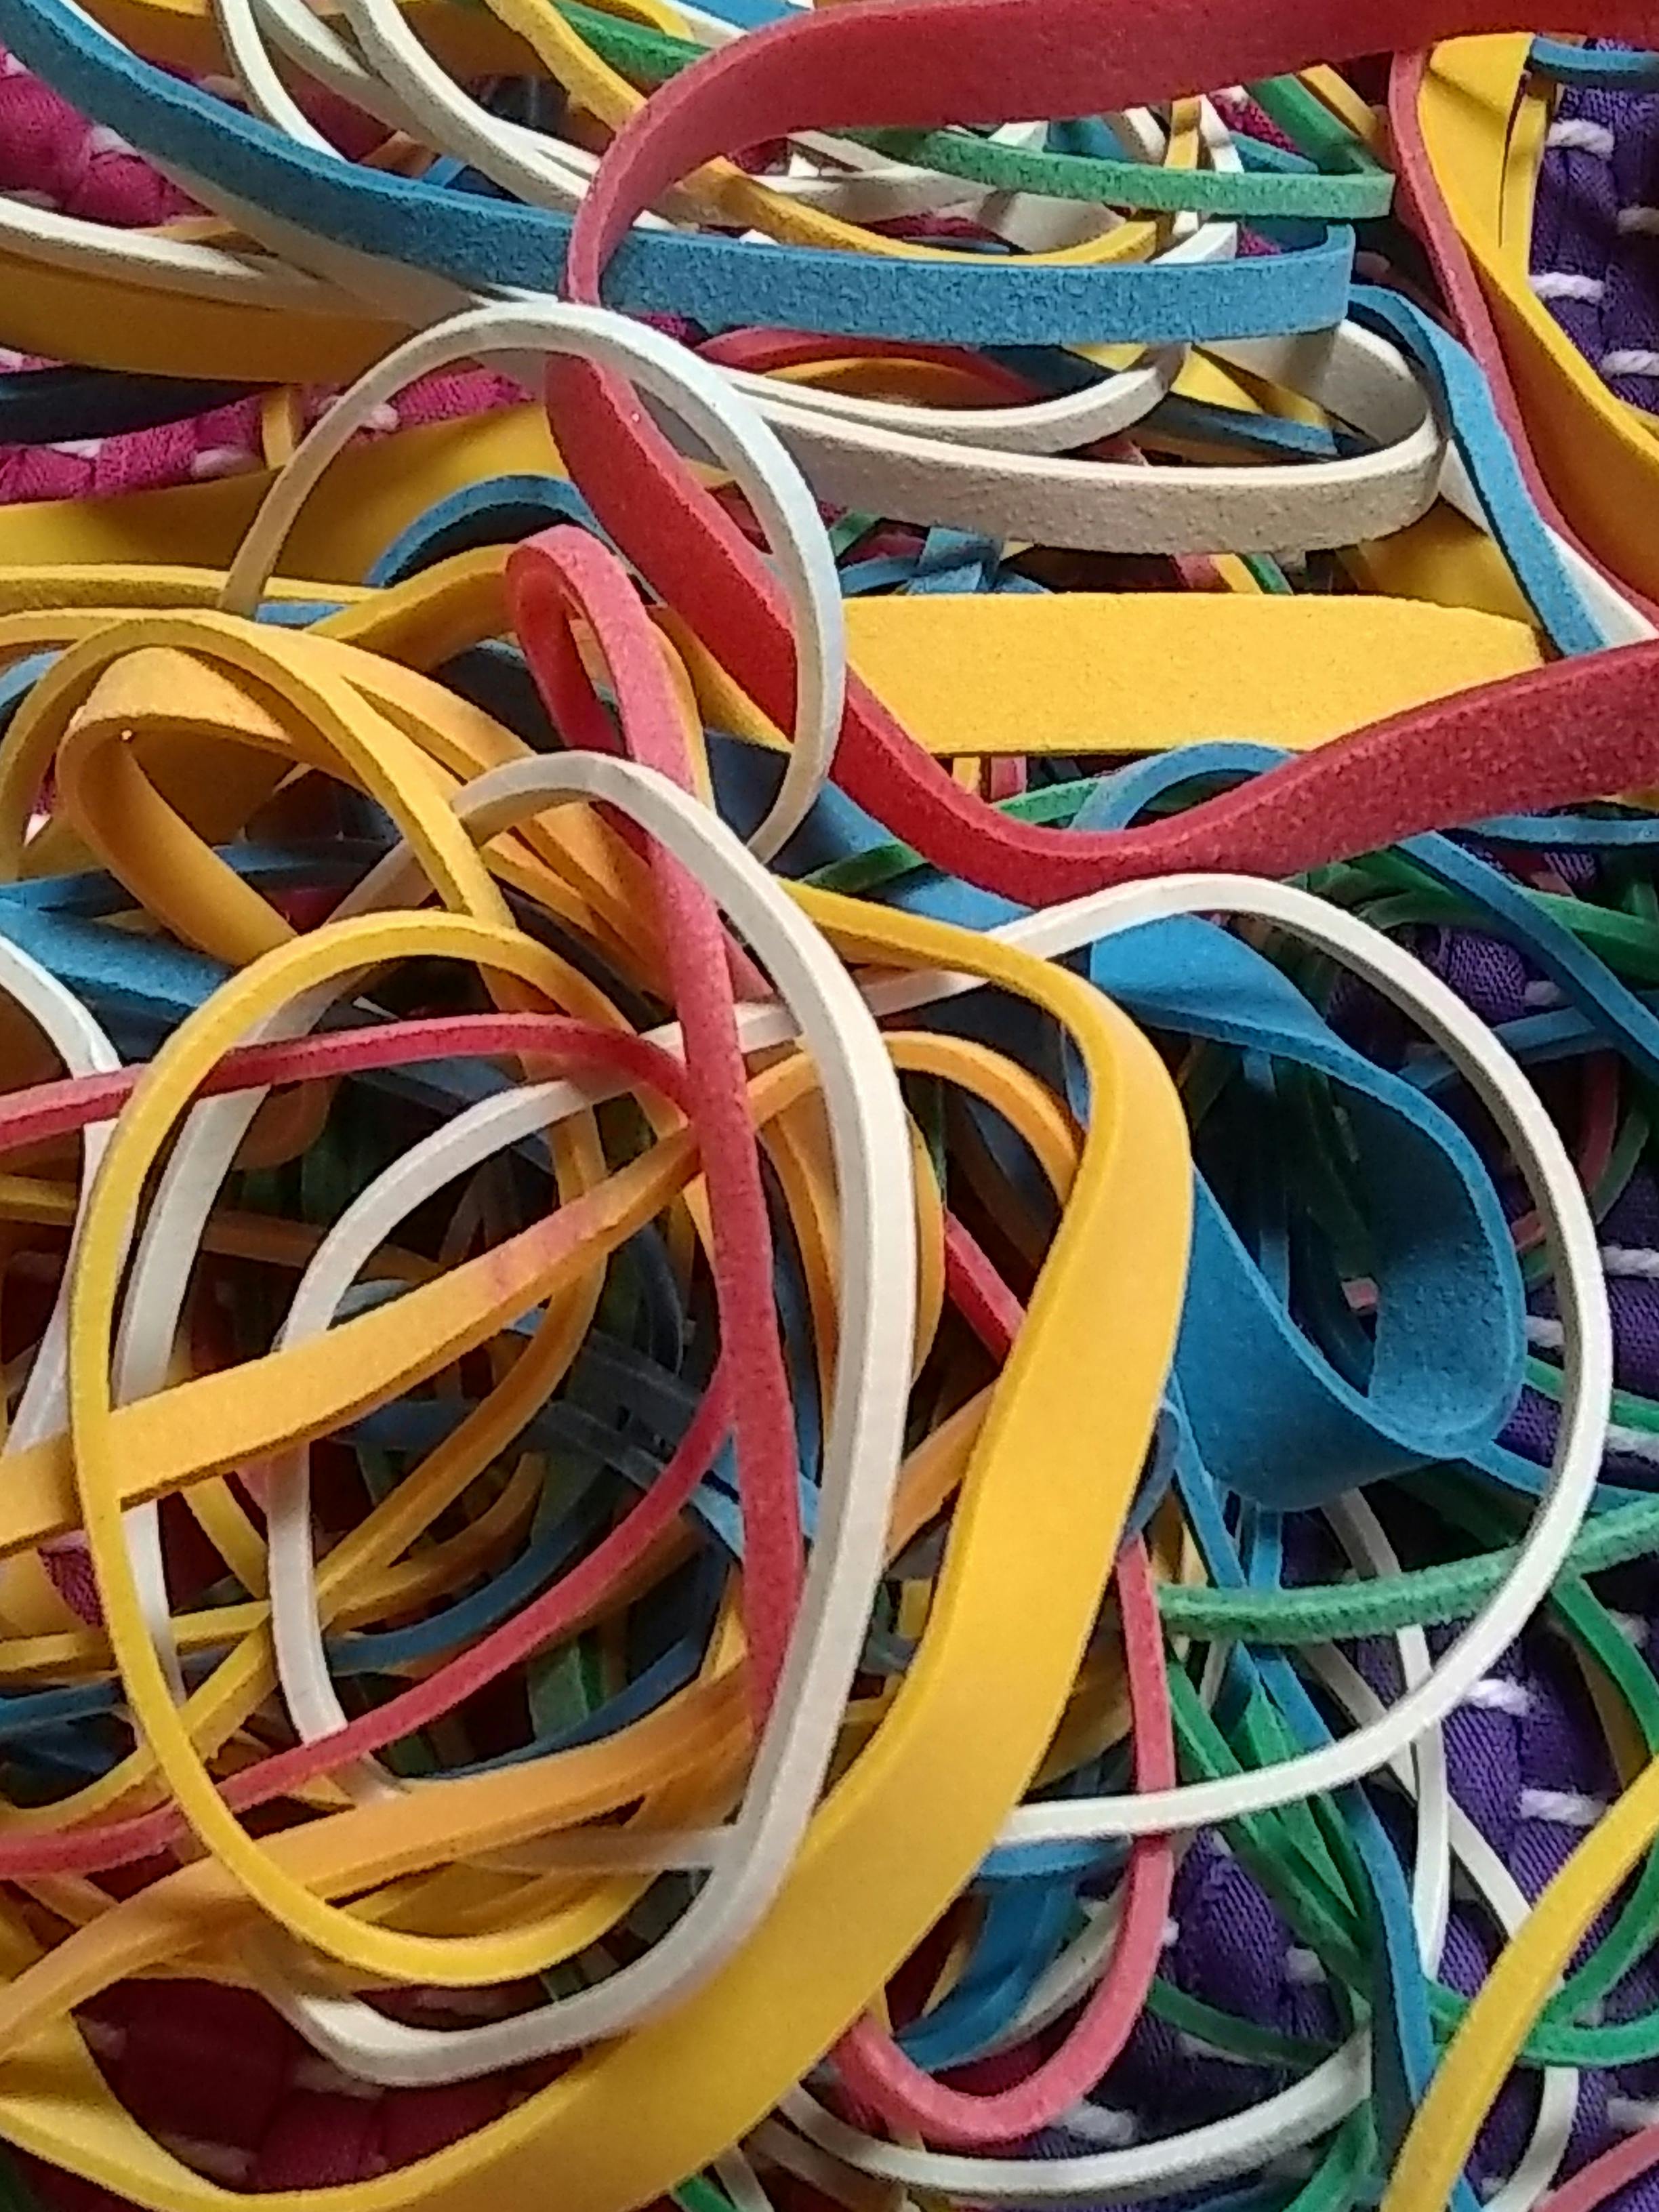 Free stock photo of rubber bands